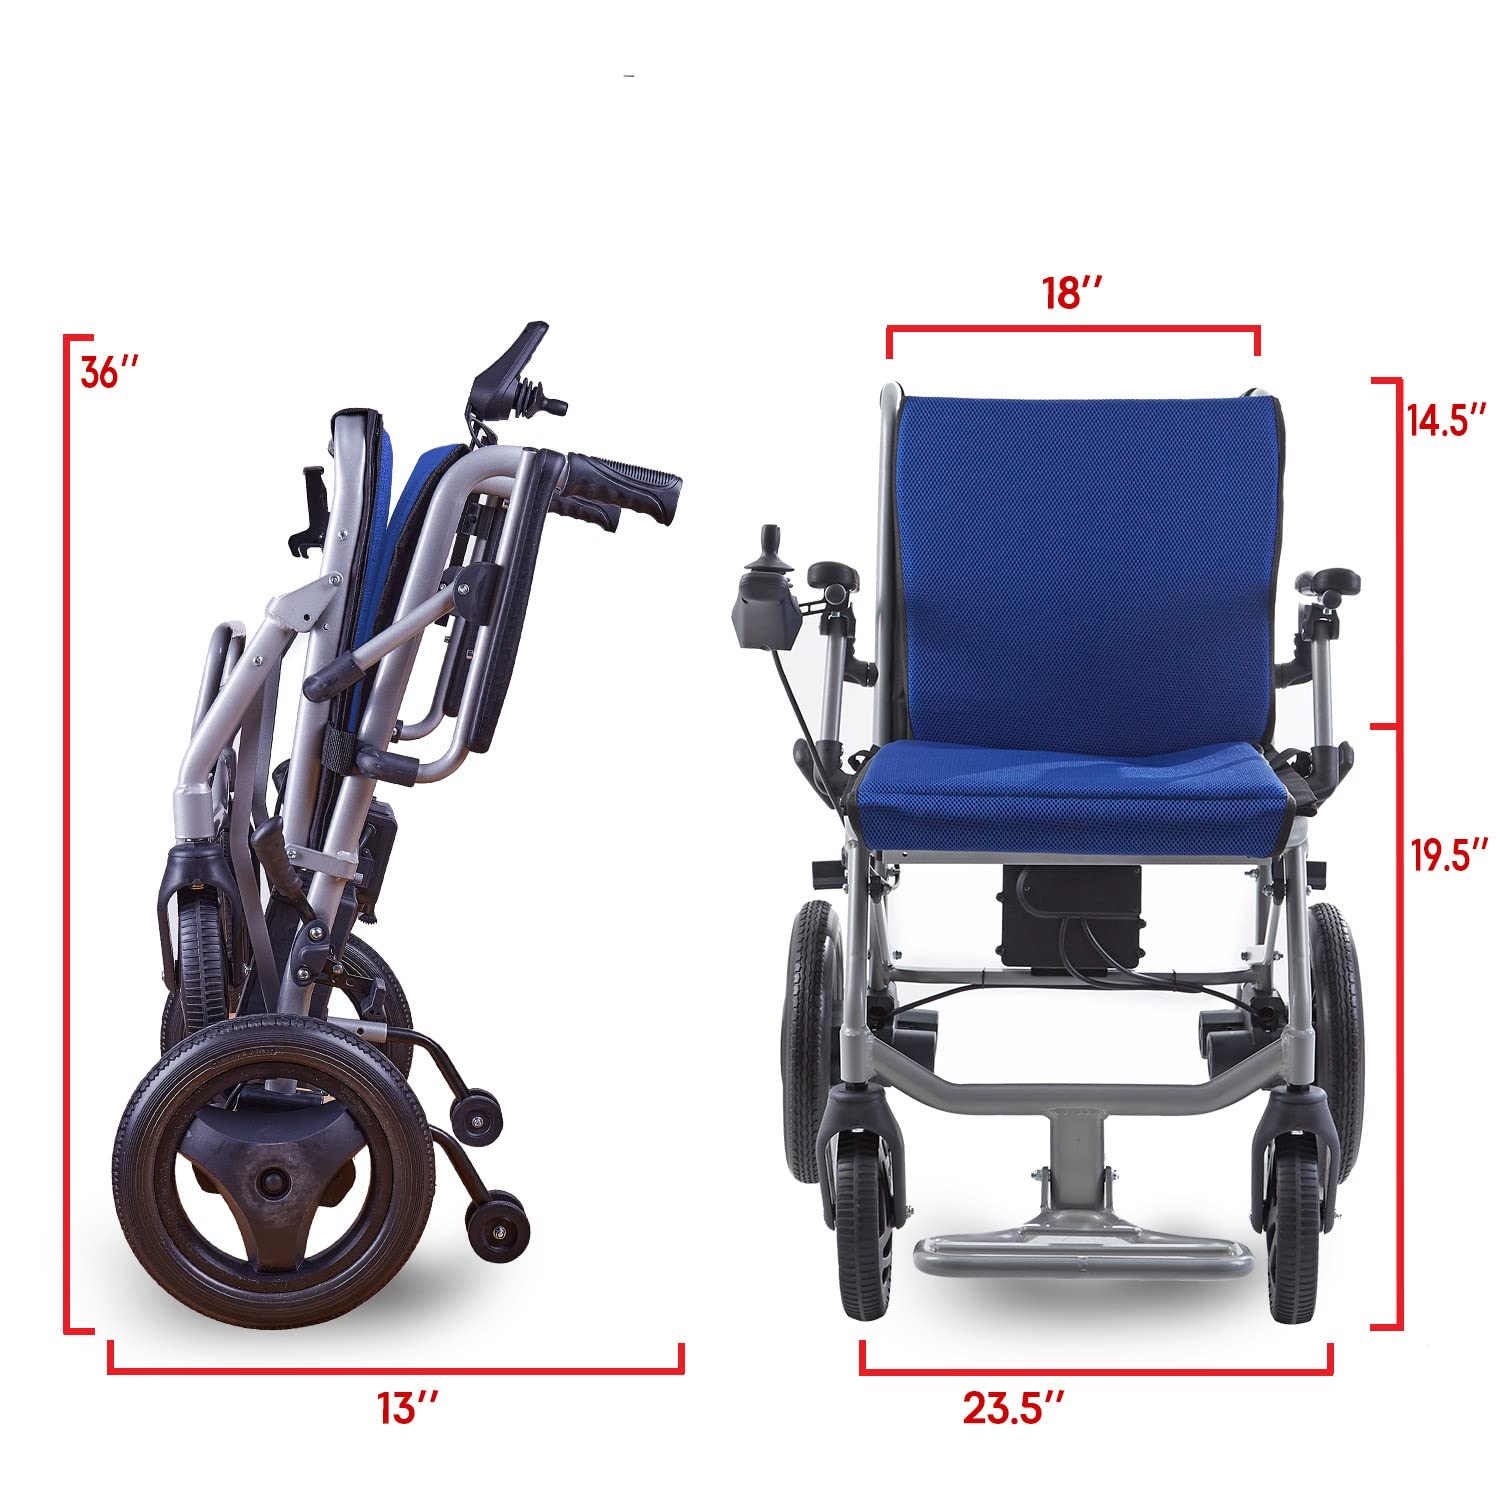 World's Lightest (Weight-30lbs) Foldable Electric Wheelchair, Travel Size, User-Friendly.